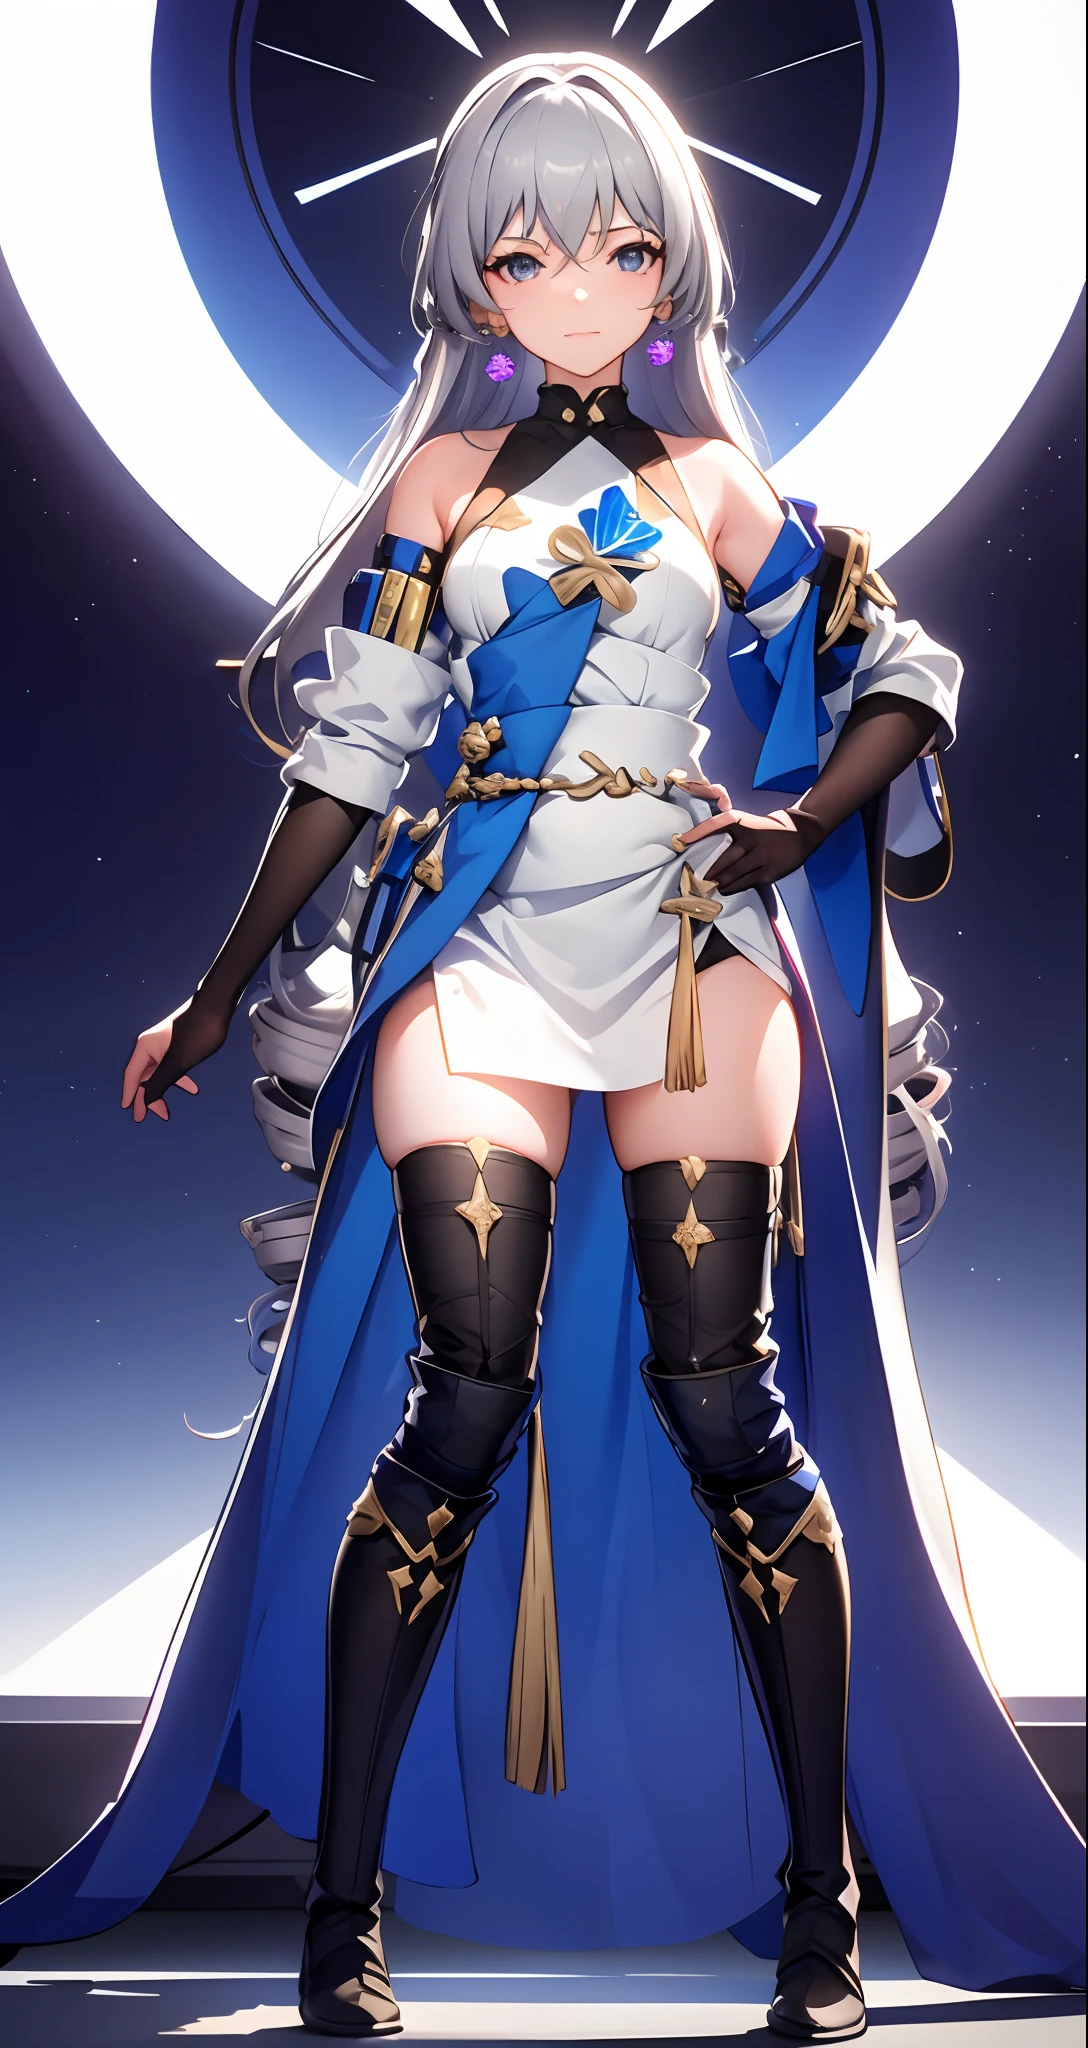 ph bronya, 1girl, 独奏, The upper part of the body，trinkets, 耳Nipple Ring, long whitr hair, whaite hair, By bangs, drill bit, cropped shoulders, Gray eye, Long boots, Stockings, Hair between the eyes, boots, gloves on the elbow, sleeveless, Black gloves, Double diamond,obi strip，Leggings，White dress，breastsout，smallunderboob，Black shoes，longer sleeves，（tmasterpiece：1.2，Need），（Delicate and beautiful eyes：1.2），（The background is meticulous，Dark fantasy），（beautiful  detailed face），hight contrast，（The best lighting，Extremely refined and beautiful），（（cinematric light）），plethora of colors，hyper-detailing，dramatic light，Complicated details，（Sharp facial hair between the eyes，dynamic angle），Black light swirling around the character，depth of fields，Black light particles，（brokenglasagic Array，